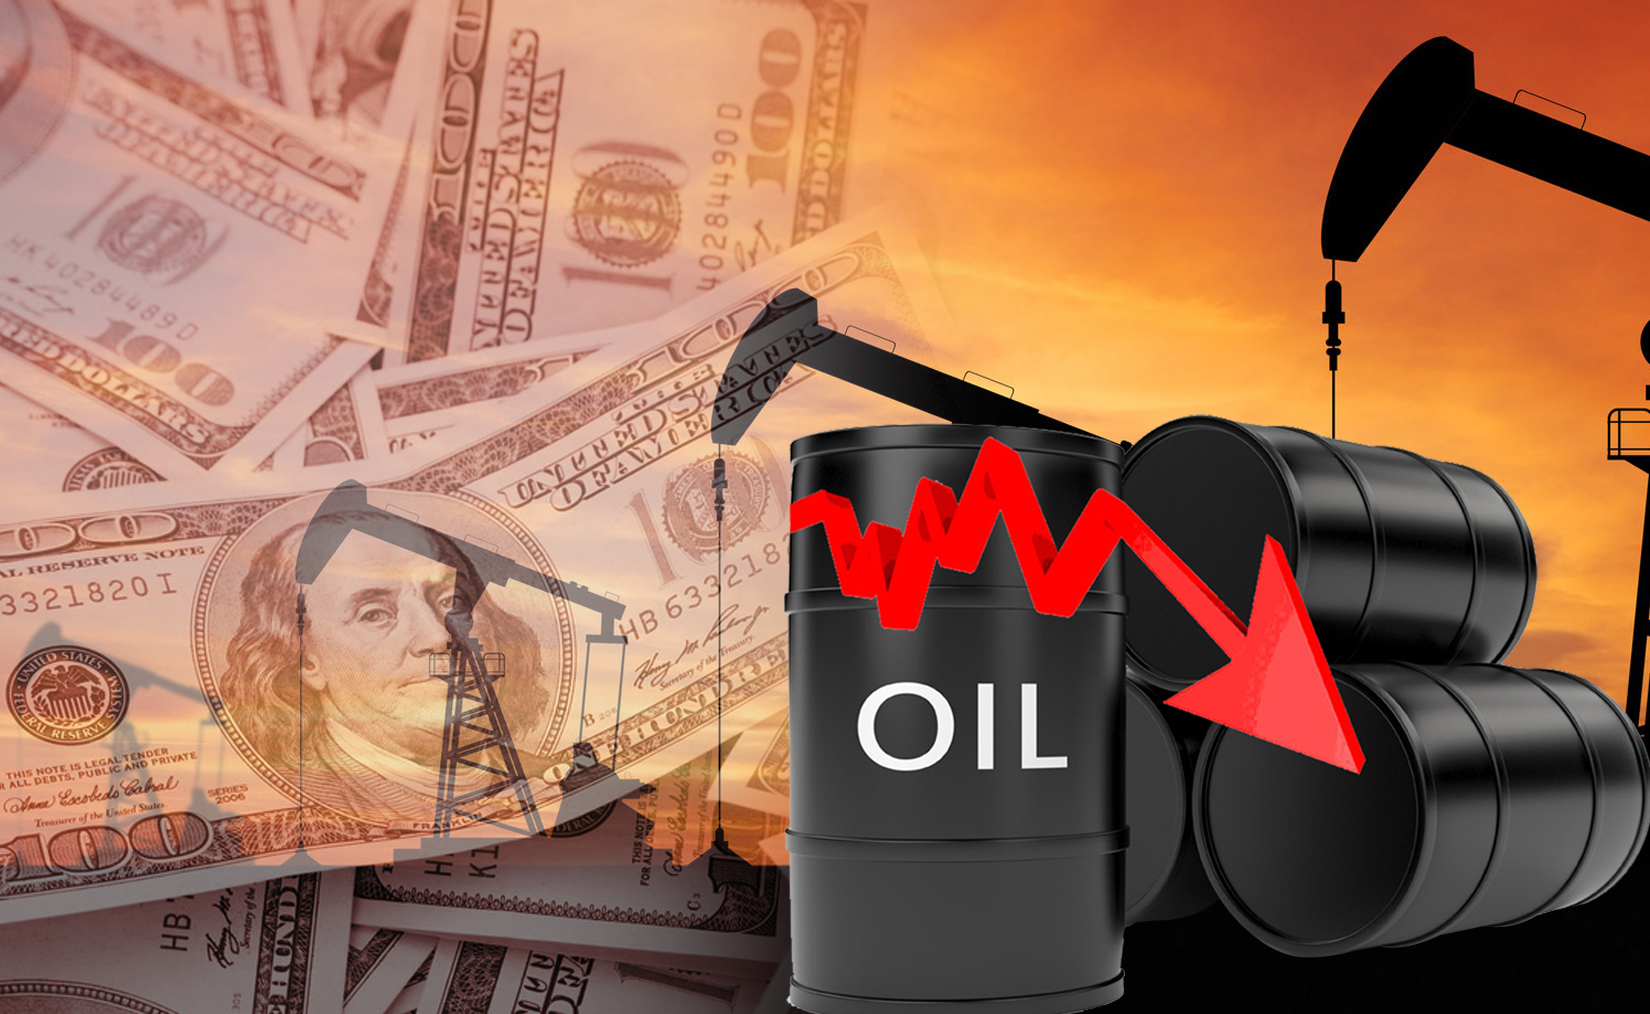 Kuwait oil price drops 99 cents to USD 66.26 pb                                                                                                                                                                                                           